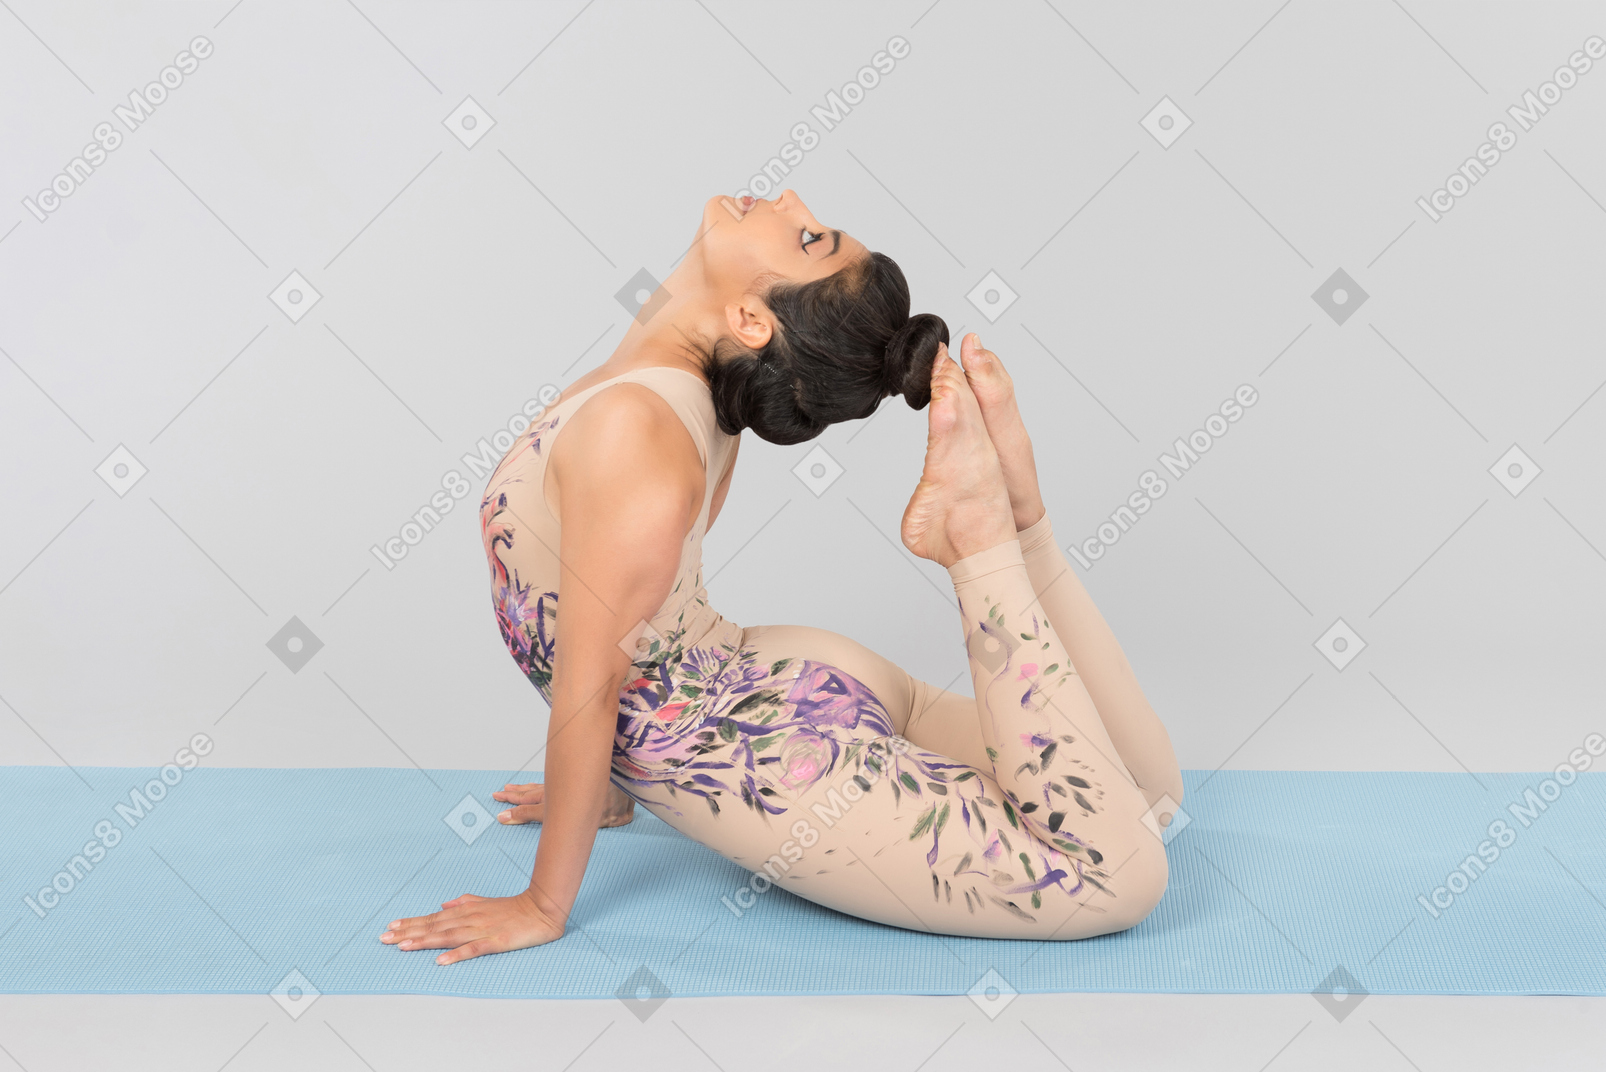 15 Crazy Yoga Poses You Wish You Could Strike - YOGA PRACTICE